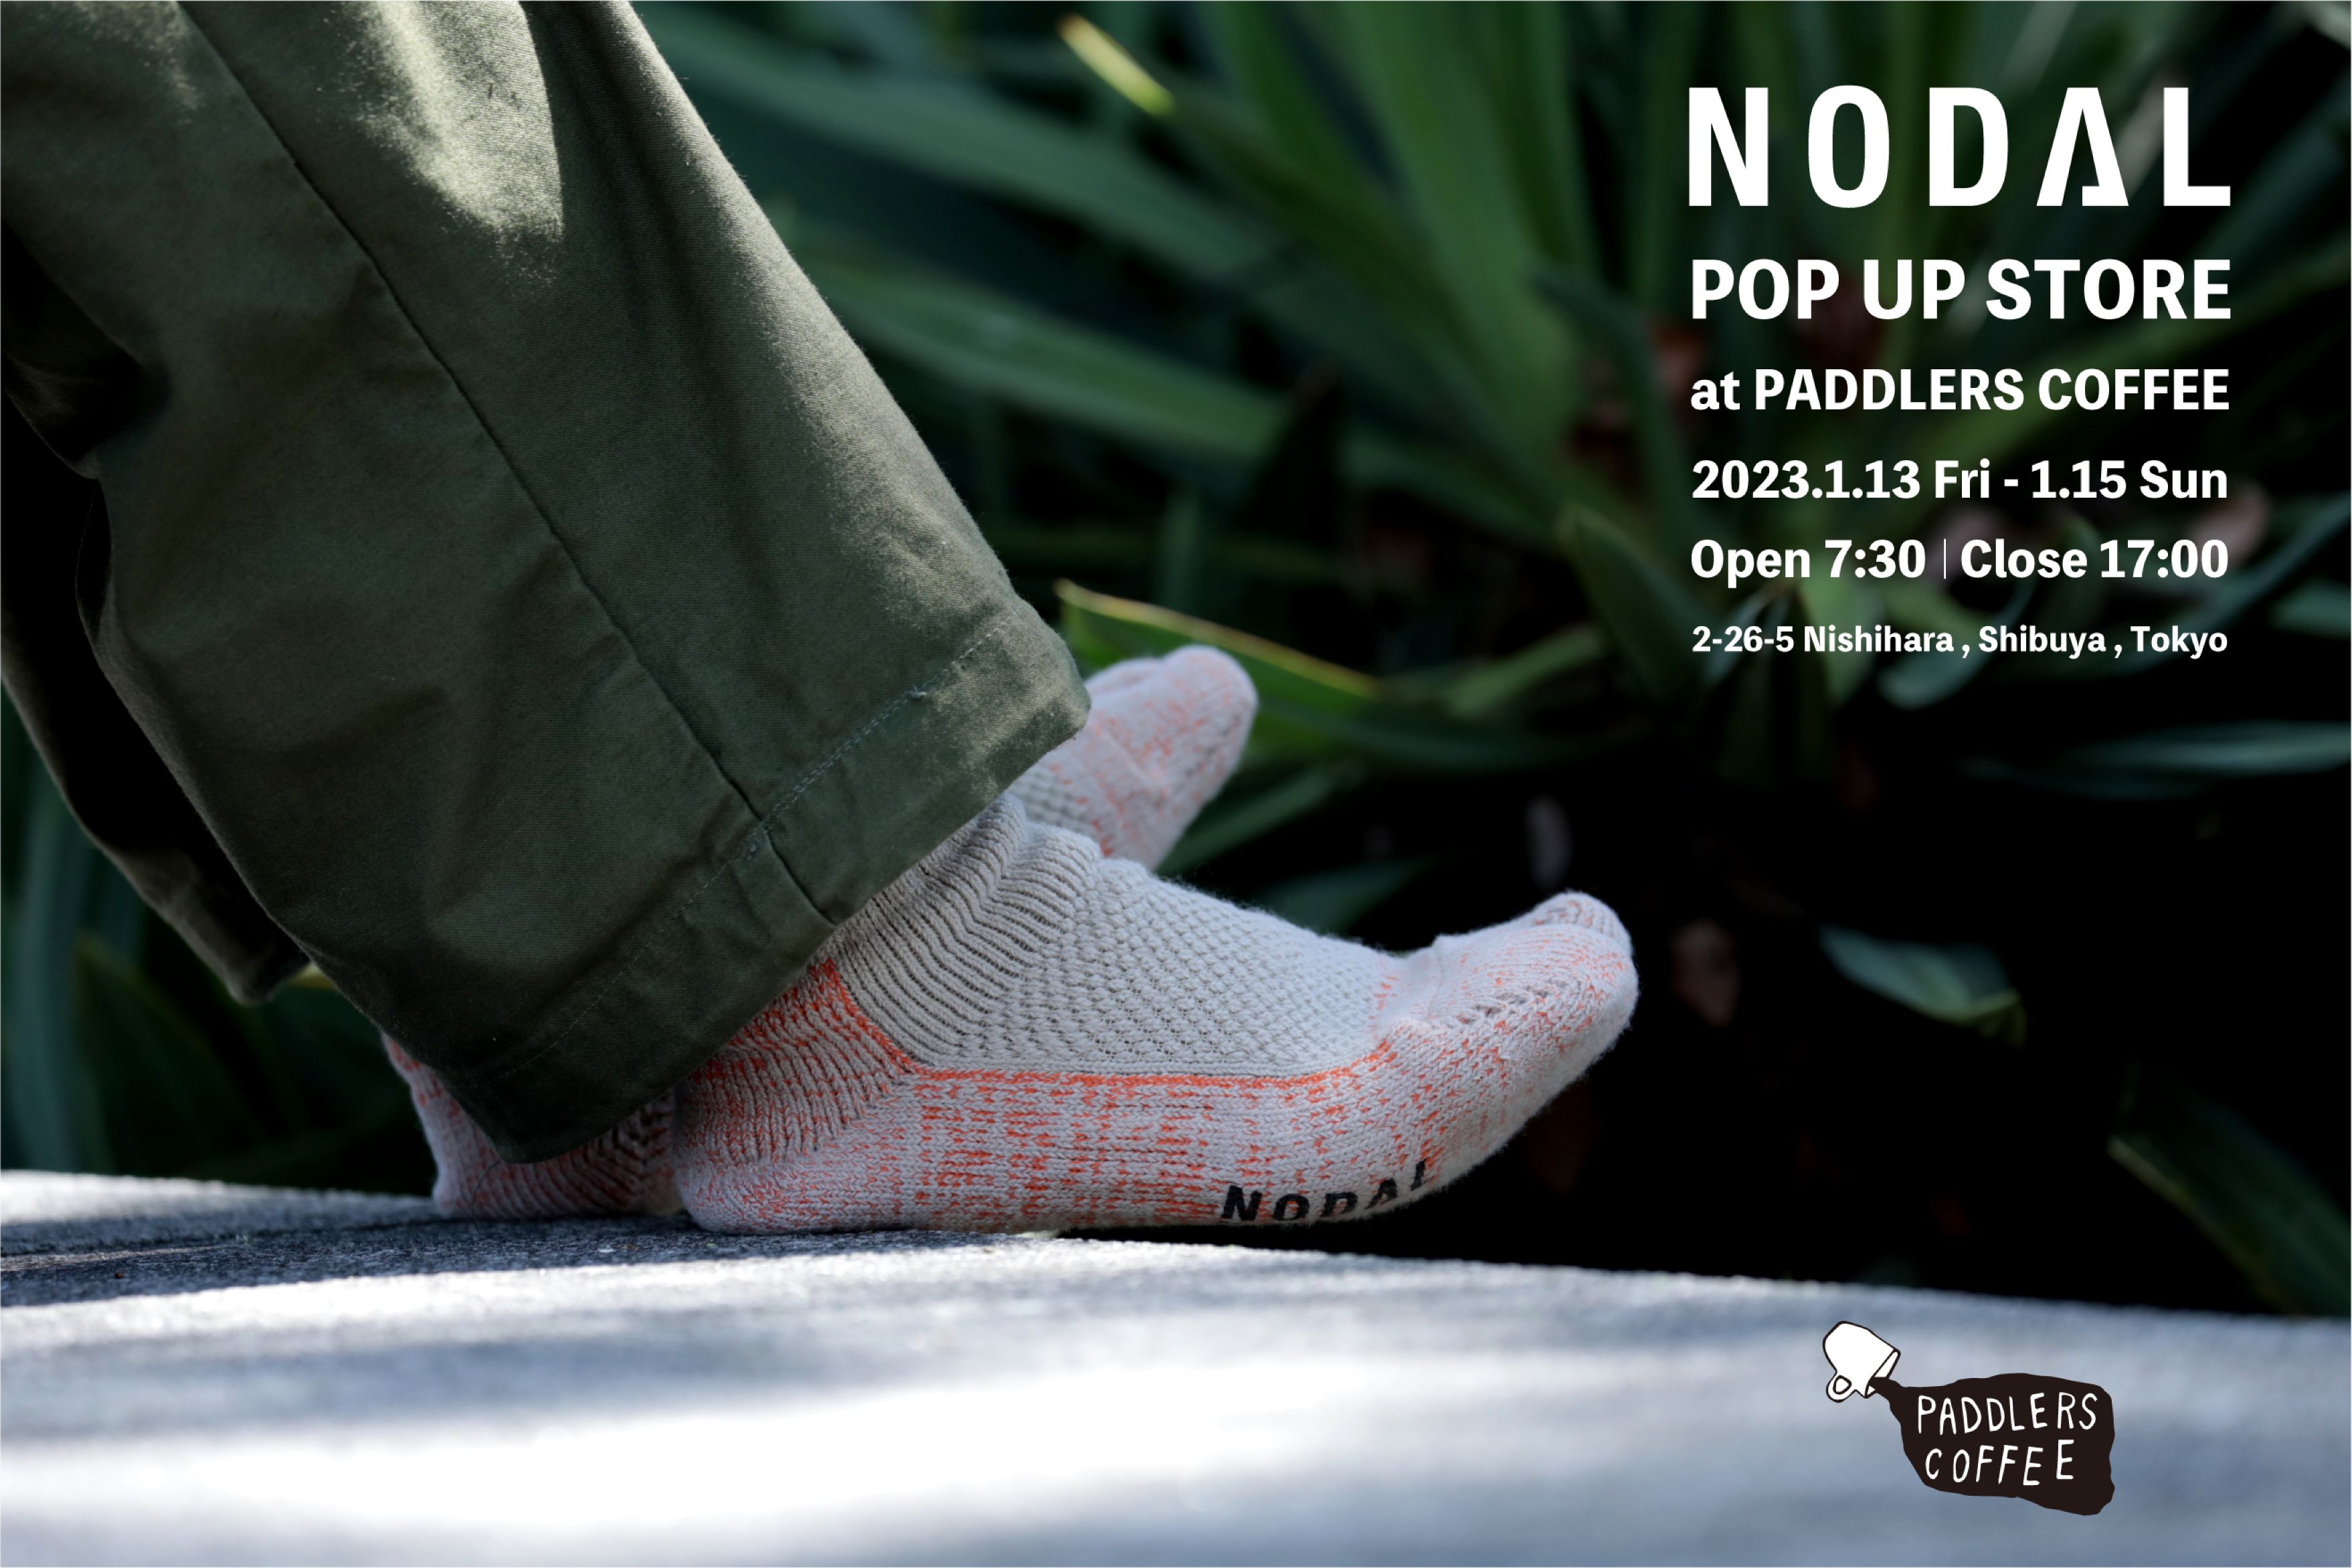 NODAL POPUP STORE at PADDLERS COFFEE